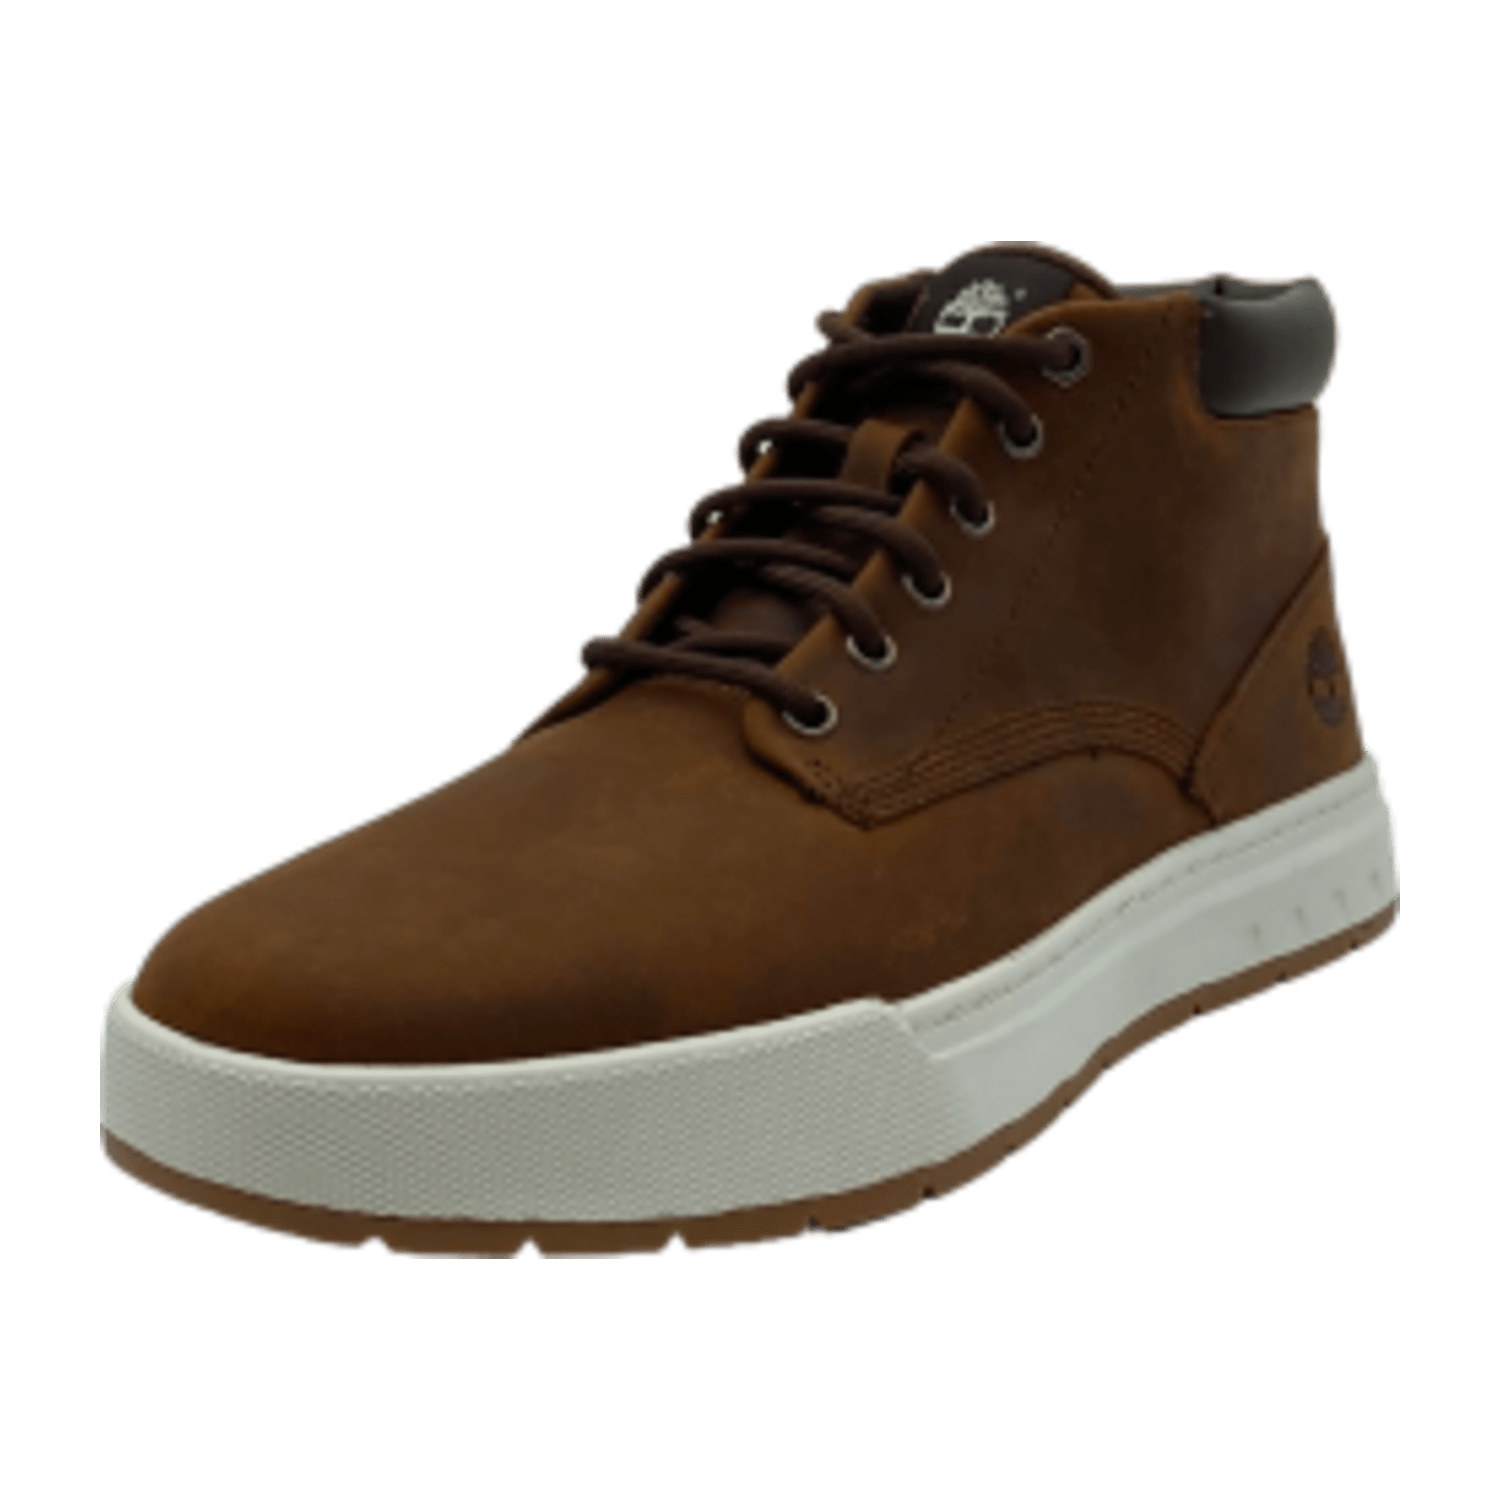 Timberland MID LACE UP SNEAKER Maple Grove